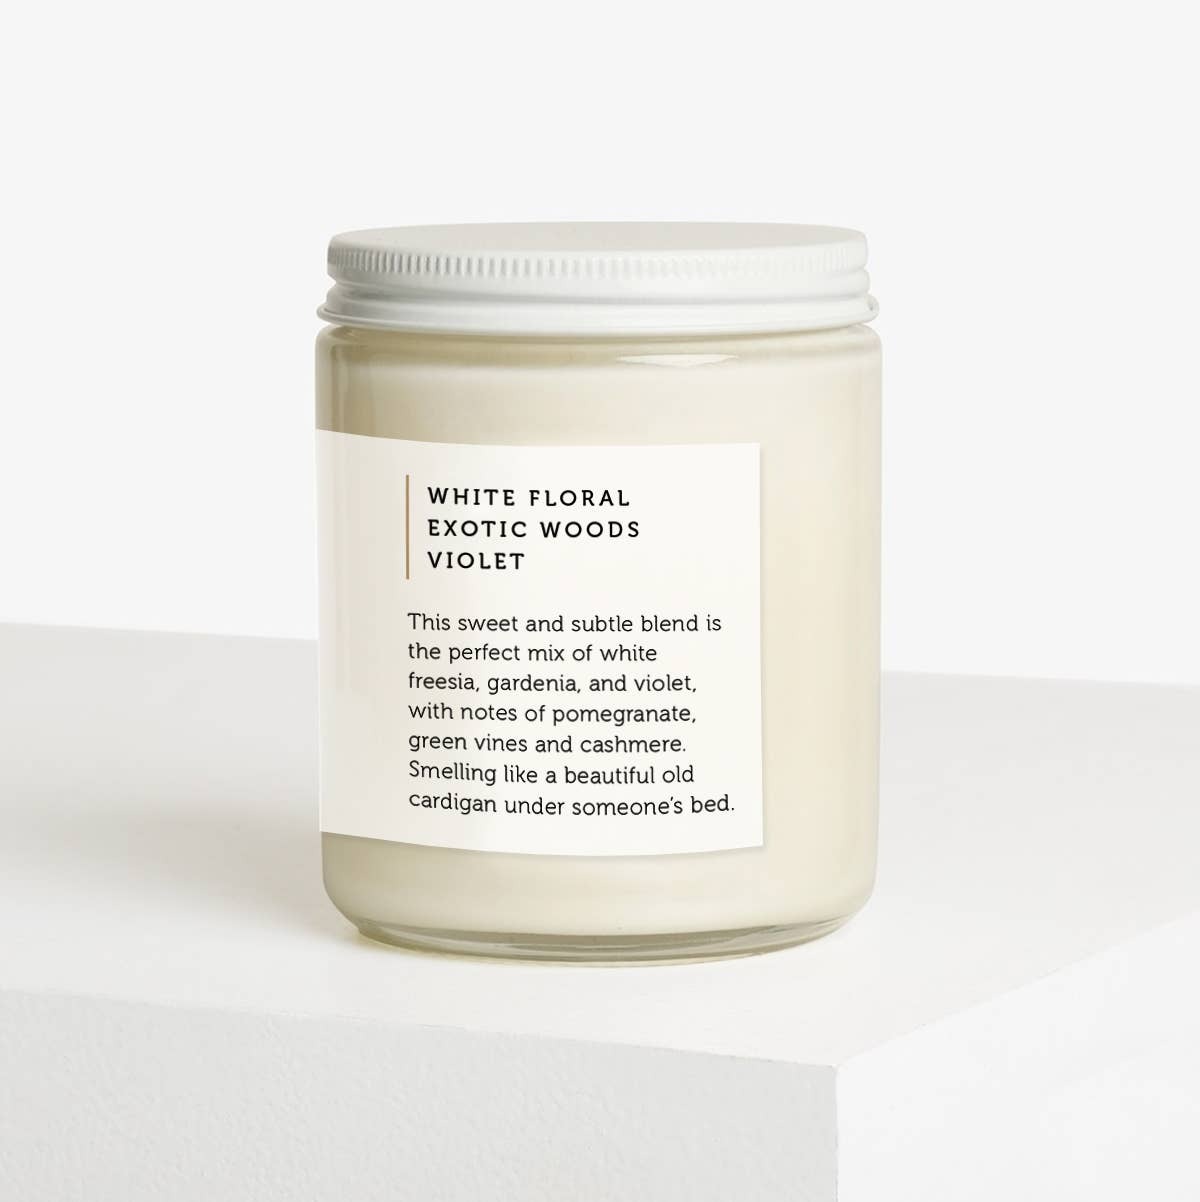 Taylor's Cardigan Soy Wax Candle | Nice Shirt Co.